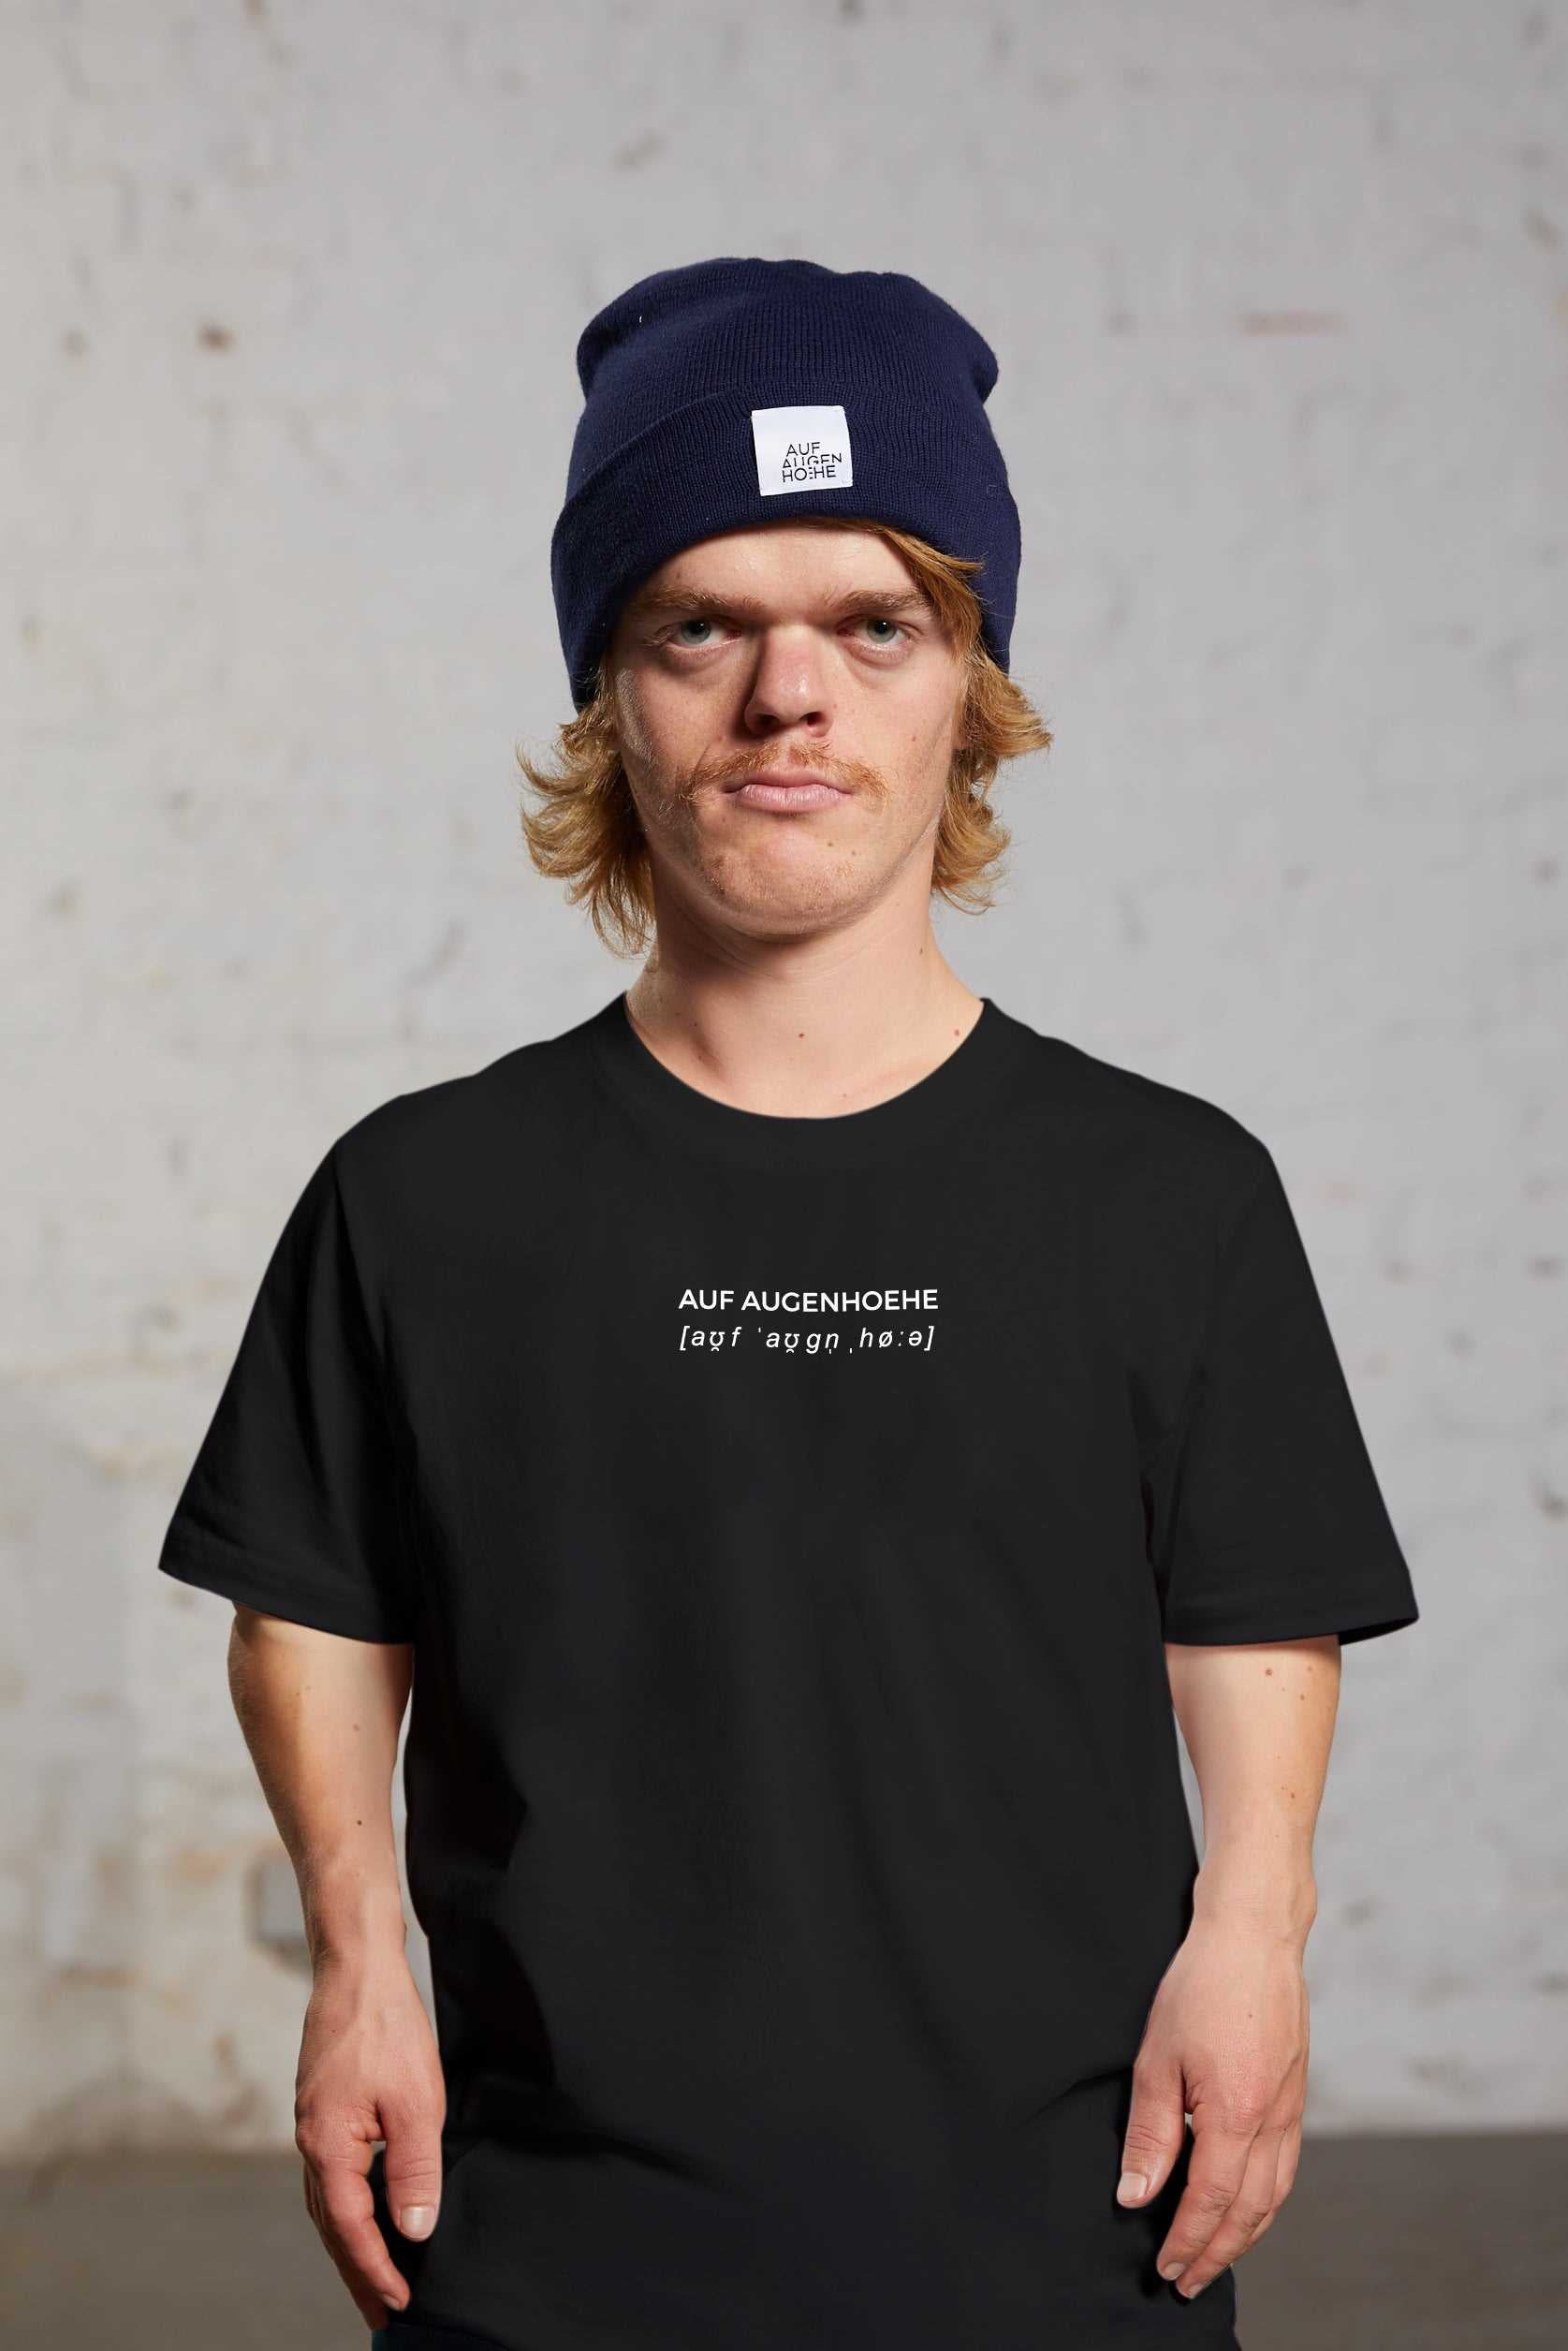 man with dwarfism wearing black t-shirt with small brand logo